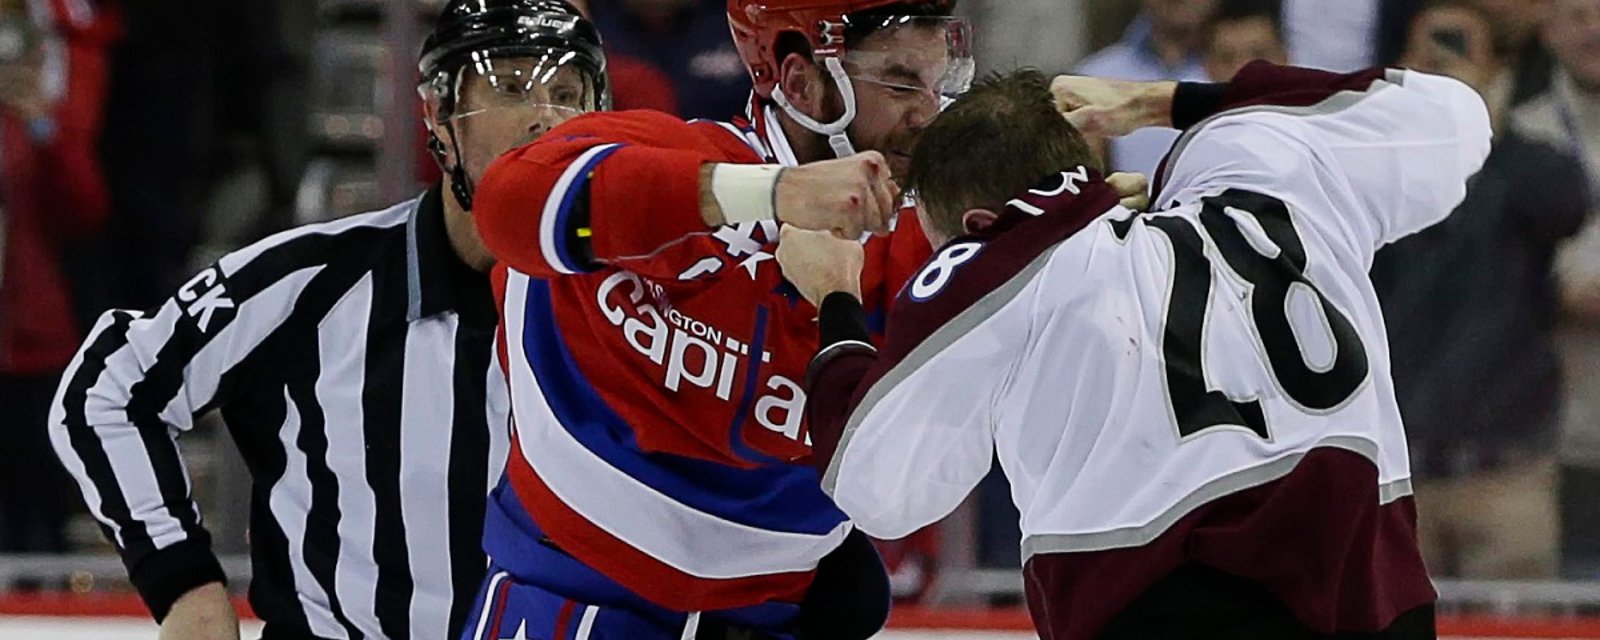 Veteran defenseman out 'indefinitely' after vicious beatdown from Tom Wilson.